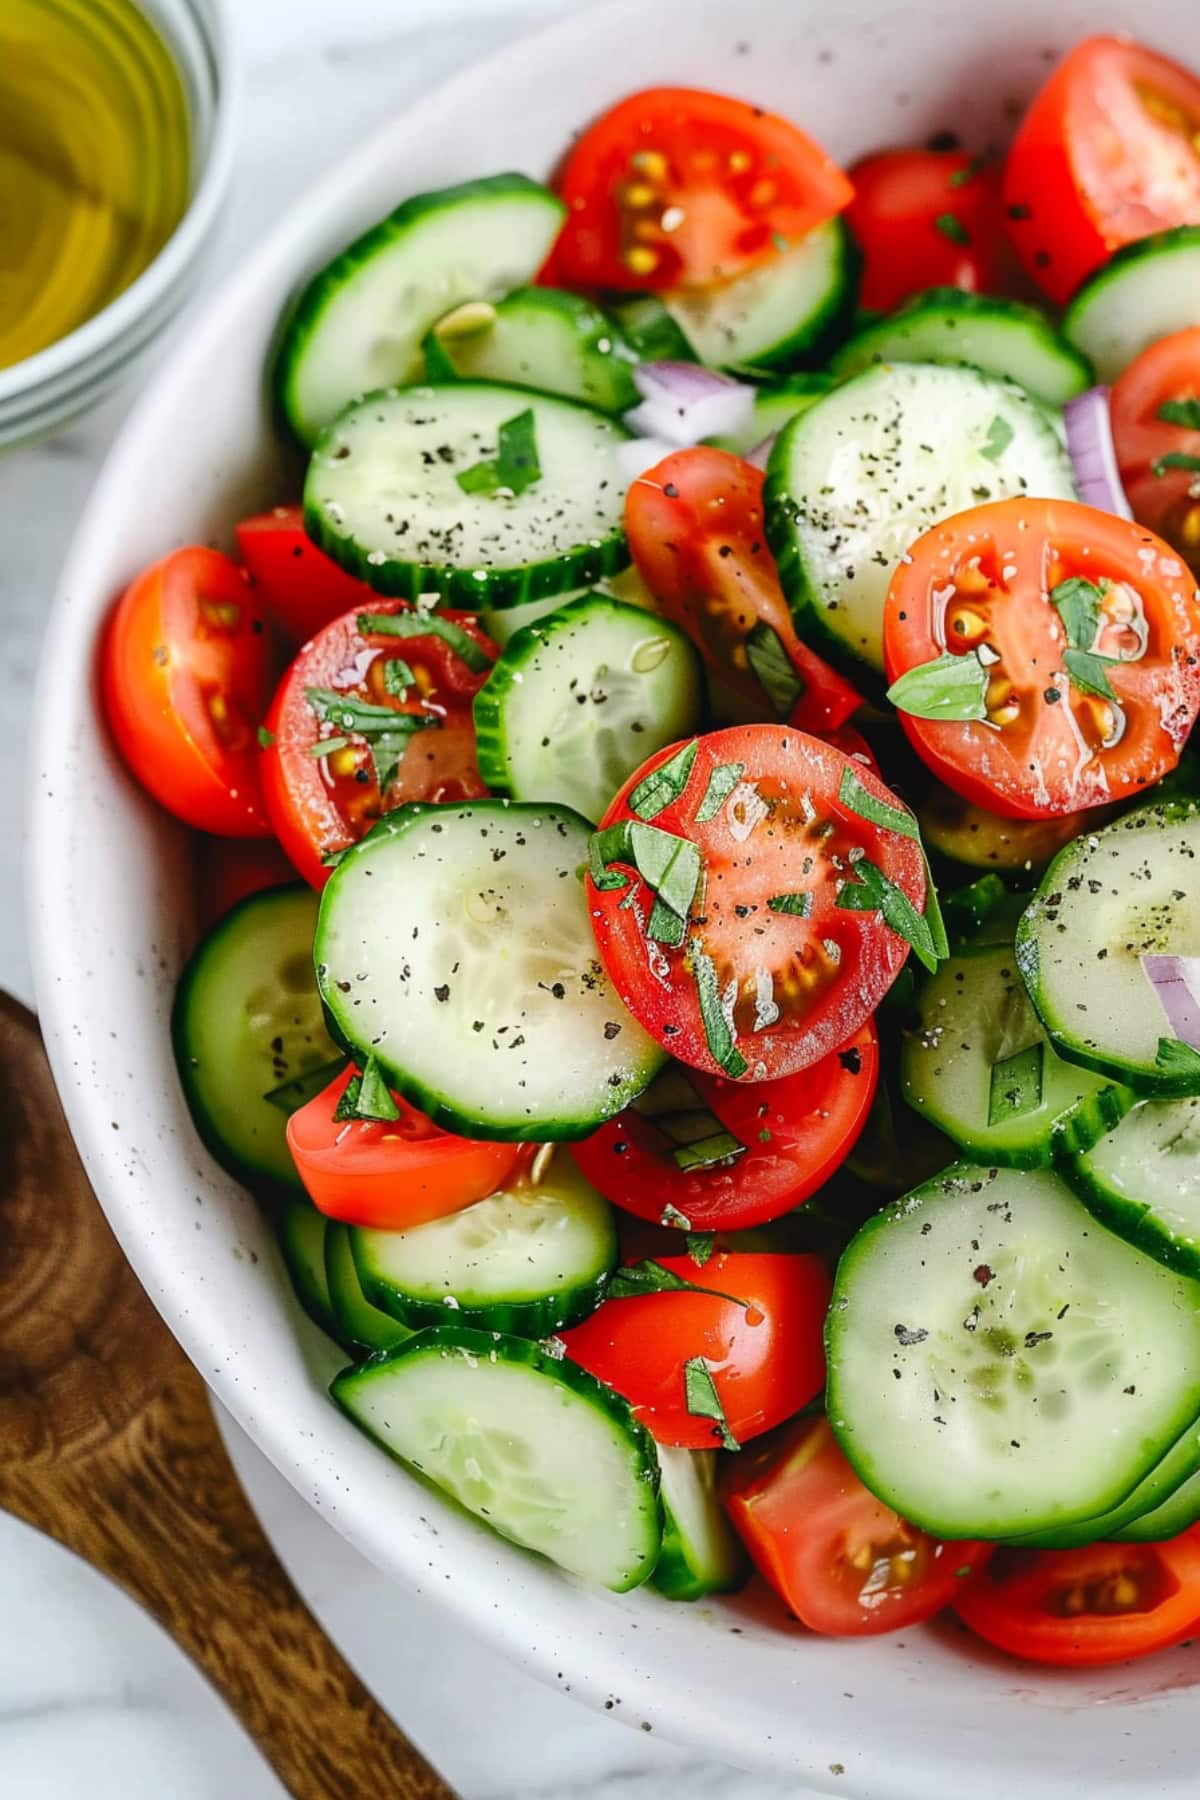 Vibrant tomato and cucumber salad with red onions, garnished with fresh basil and a drizzle of olive oil.